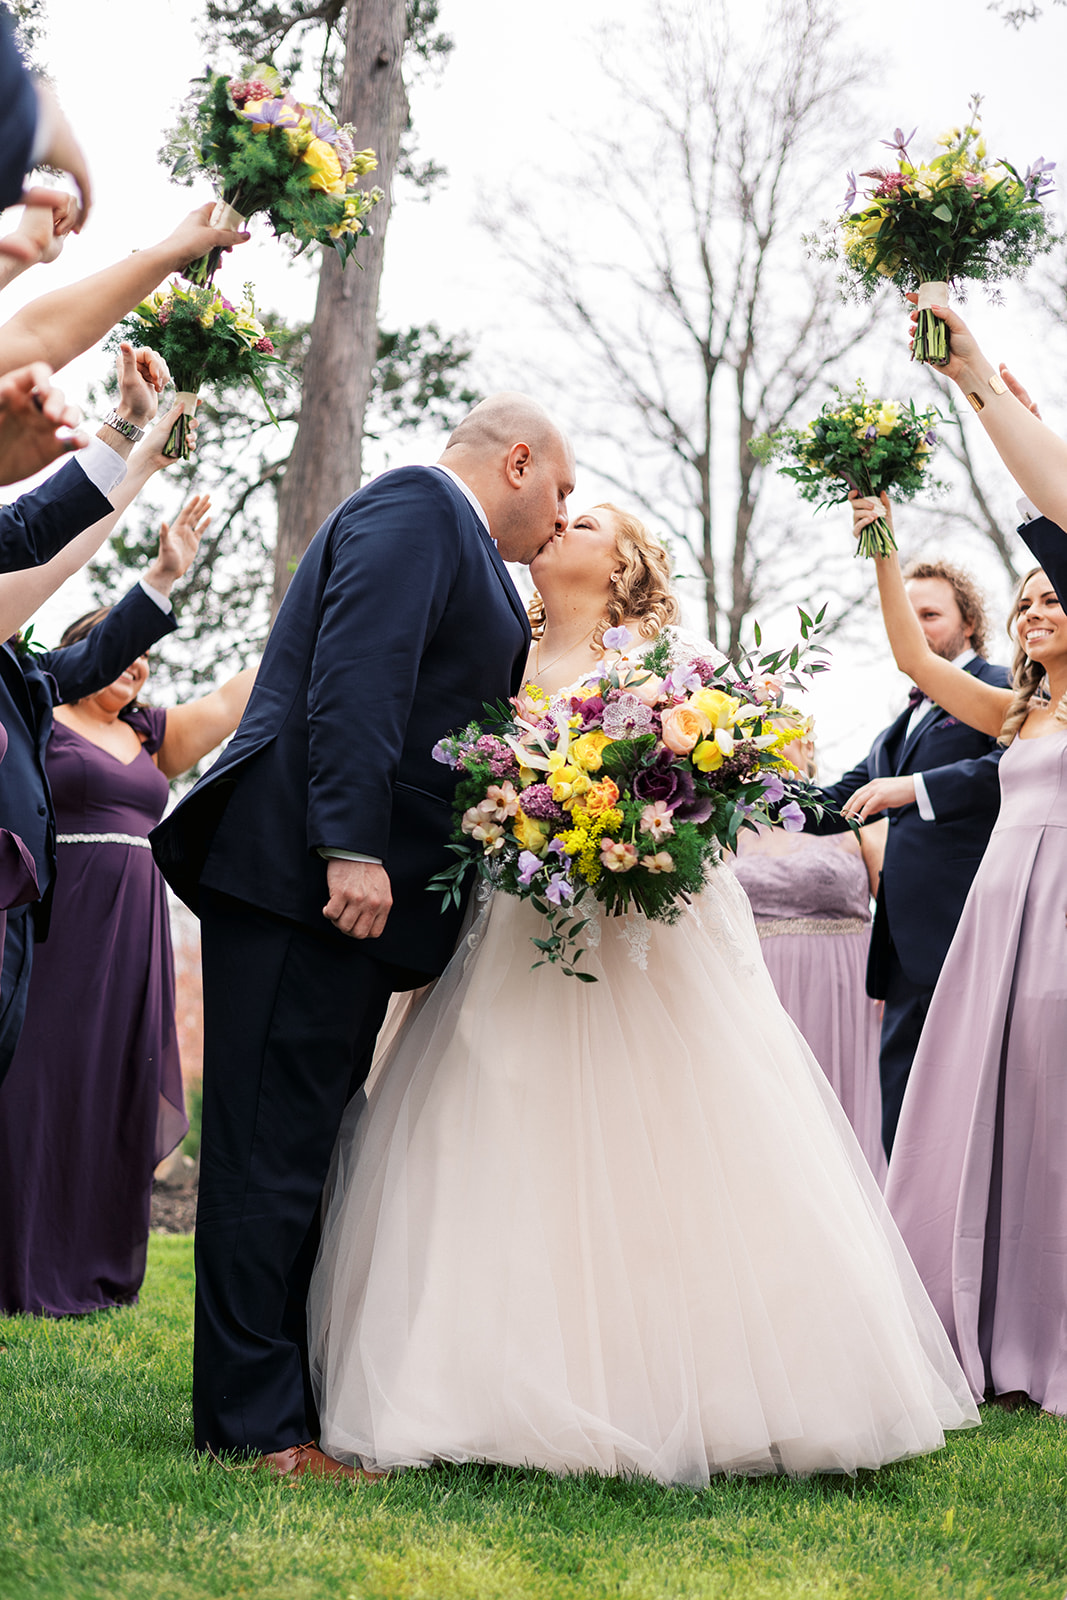 Newlyweds kiss while surrounded by celebrating wedding parties with bouquets raised